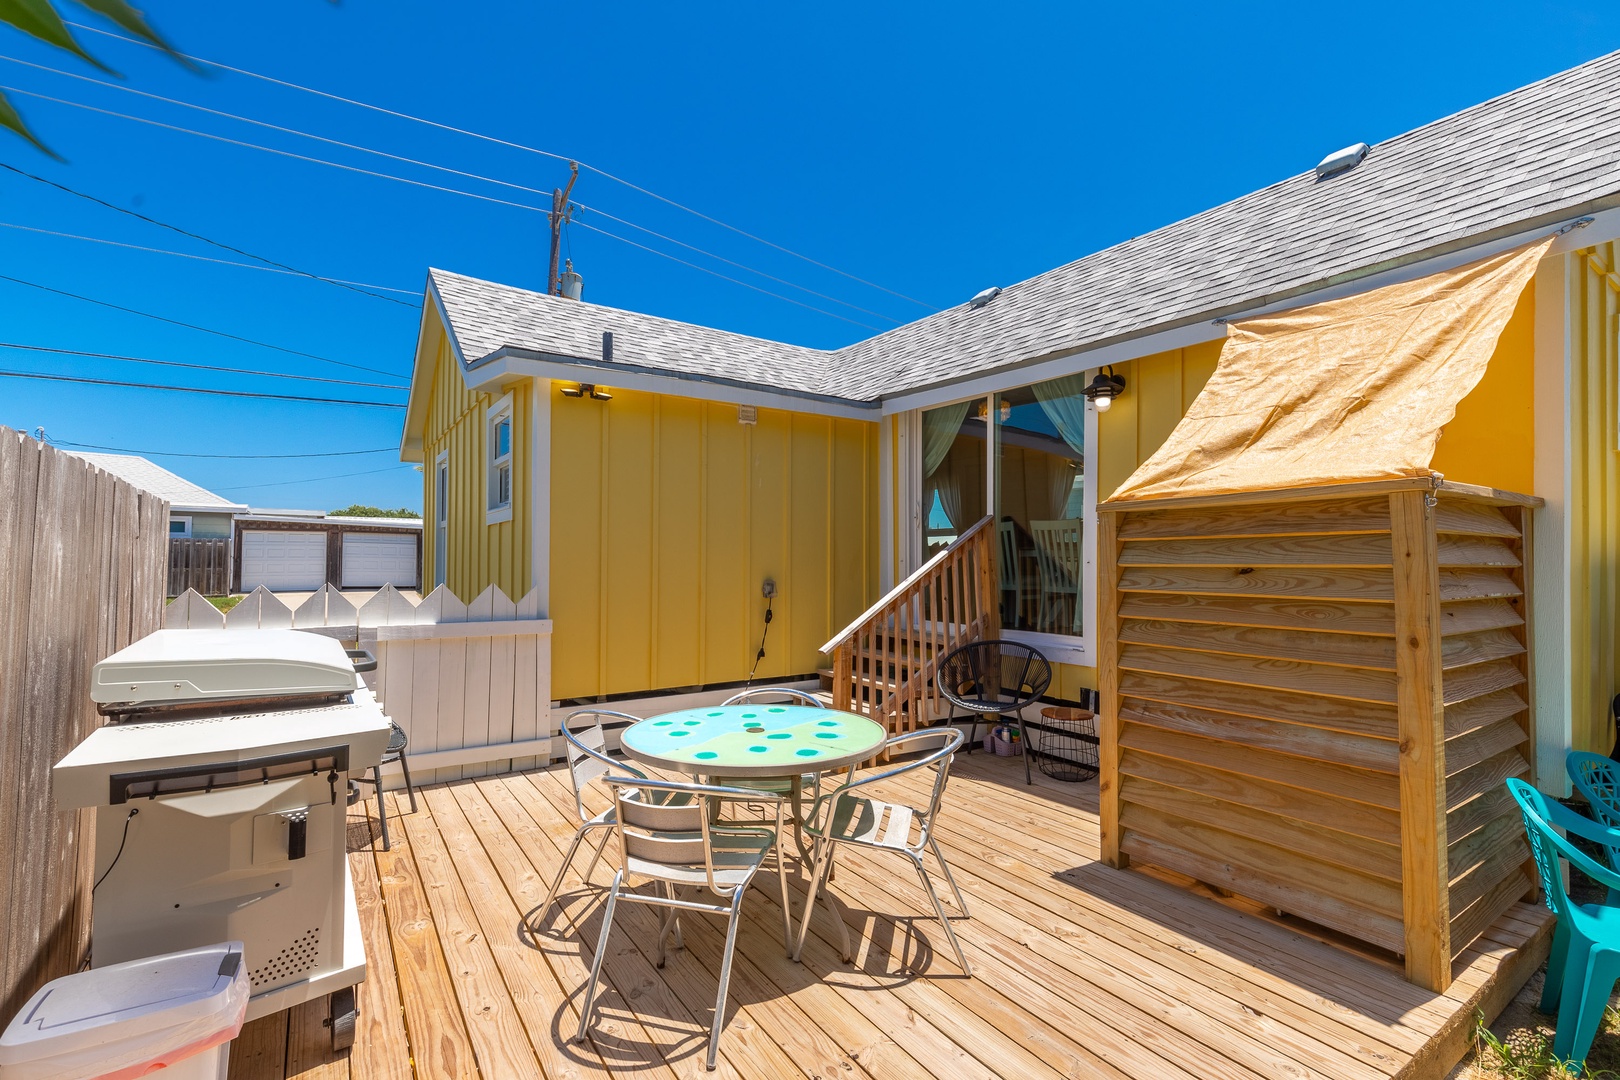 The sunny back deck is outfitted with an outdoor shower, dining set, & grill